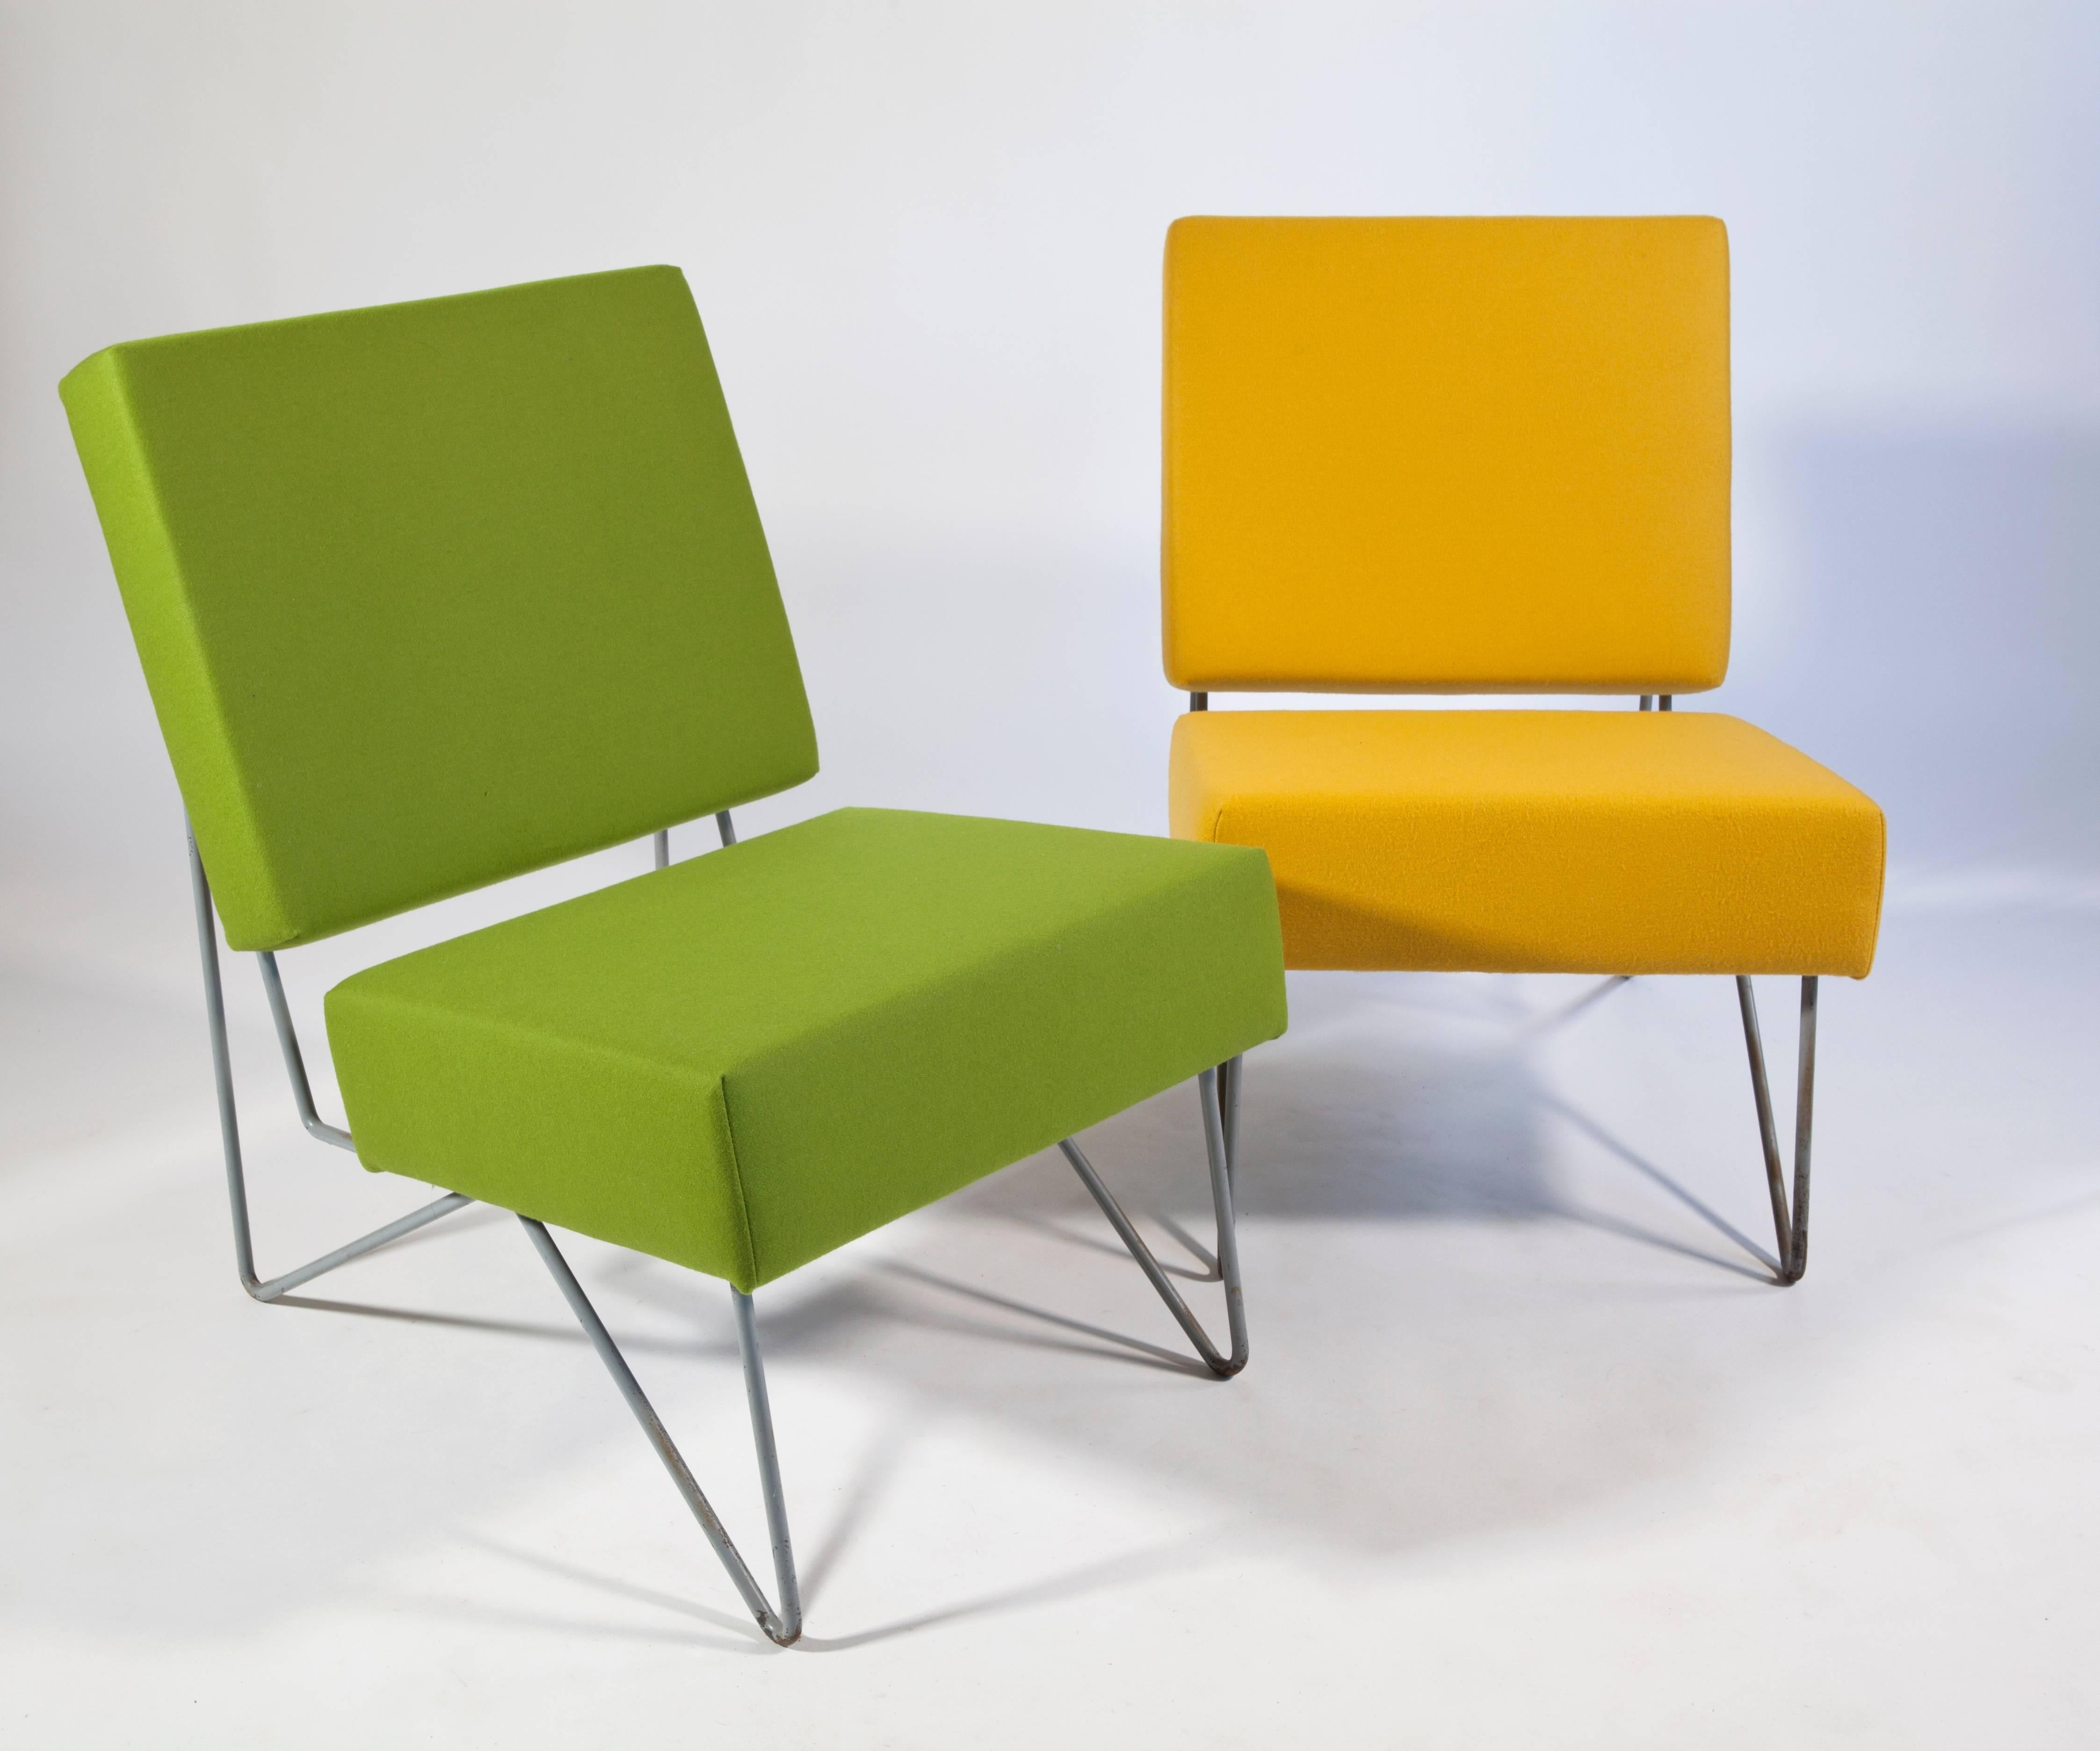 Dutch Combex FM03 Chair Designed by Cees Braakman for Pastoe, 1954